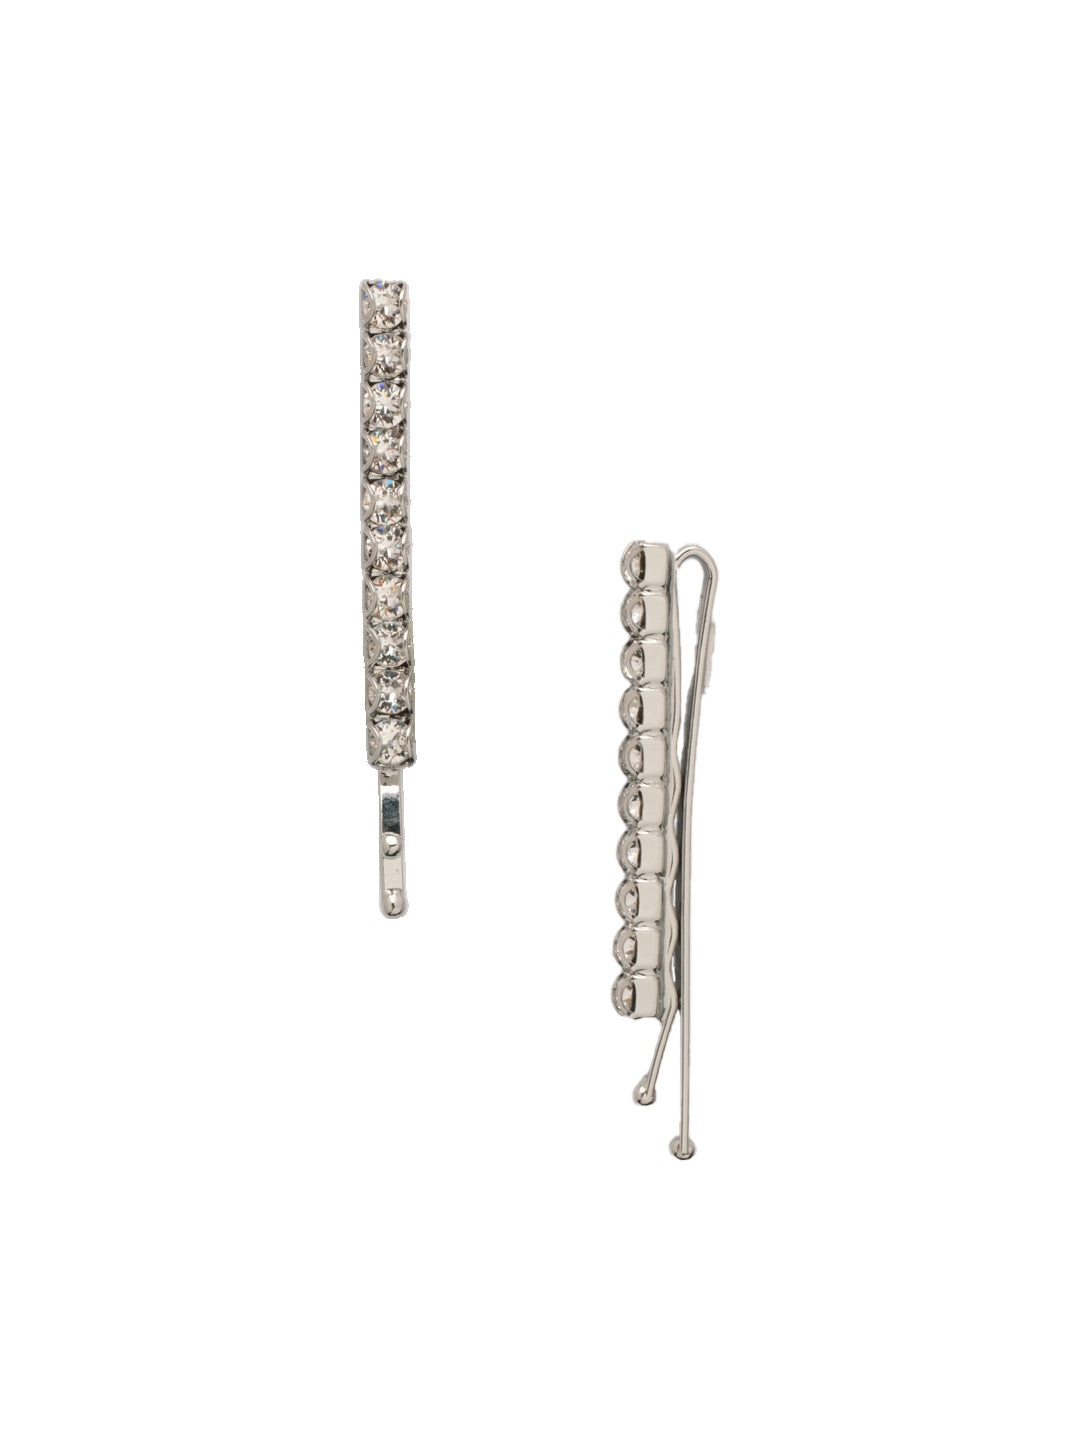 Harper Hair Pin - HFL3PDCRY - <p>The Harper Hair Pin features two crystal embellished bobby pins, perfect for any hairstyle! From Sorrelli's Crystal collection in our Palladium finish.</p>